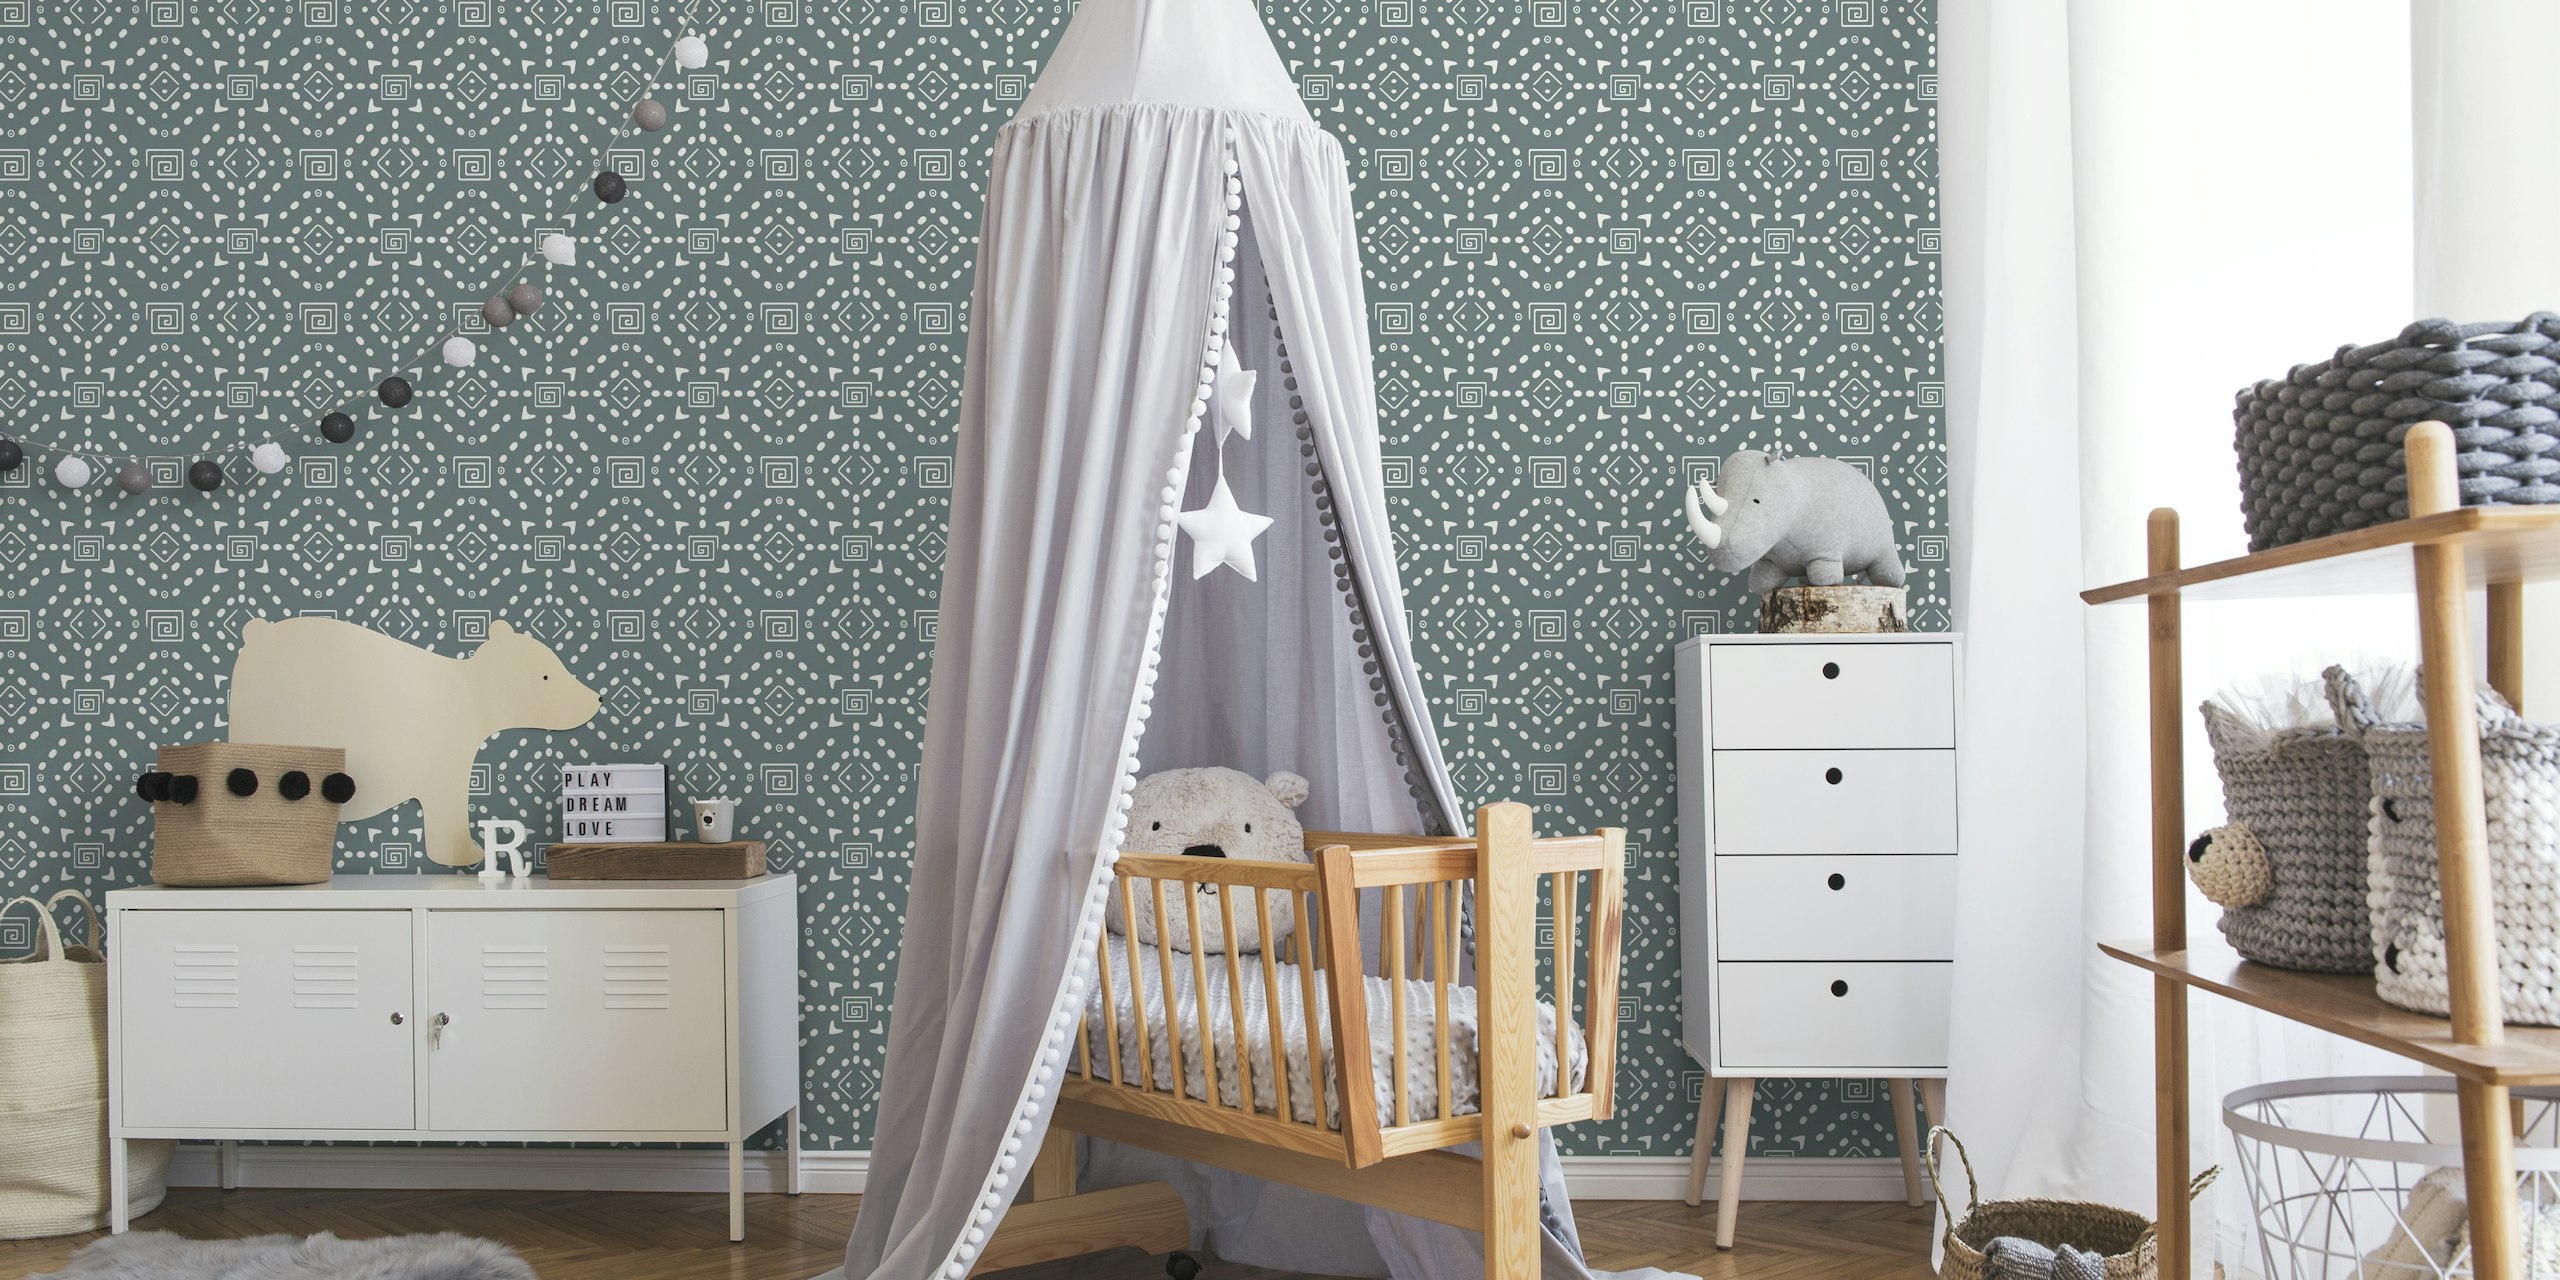 Boho nursery wall mural with traditional African mudcloth inspired design in grey tones.